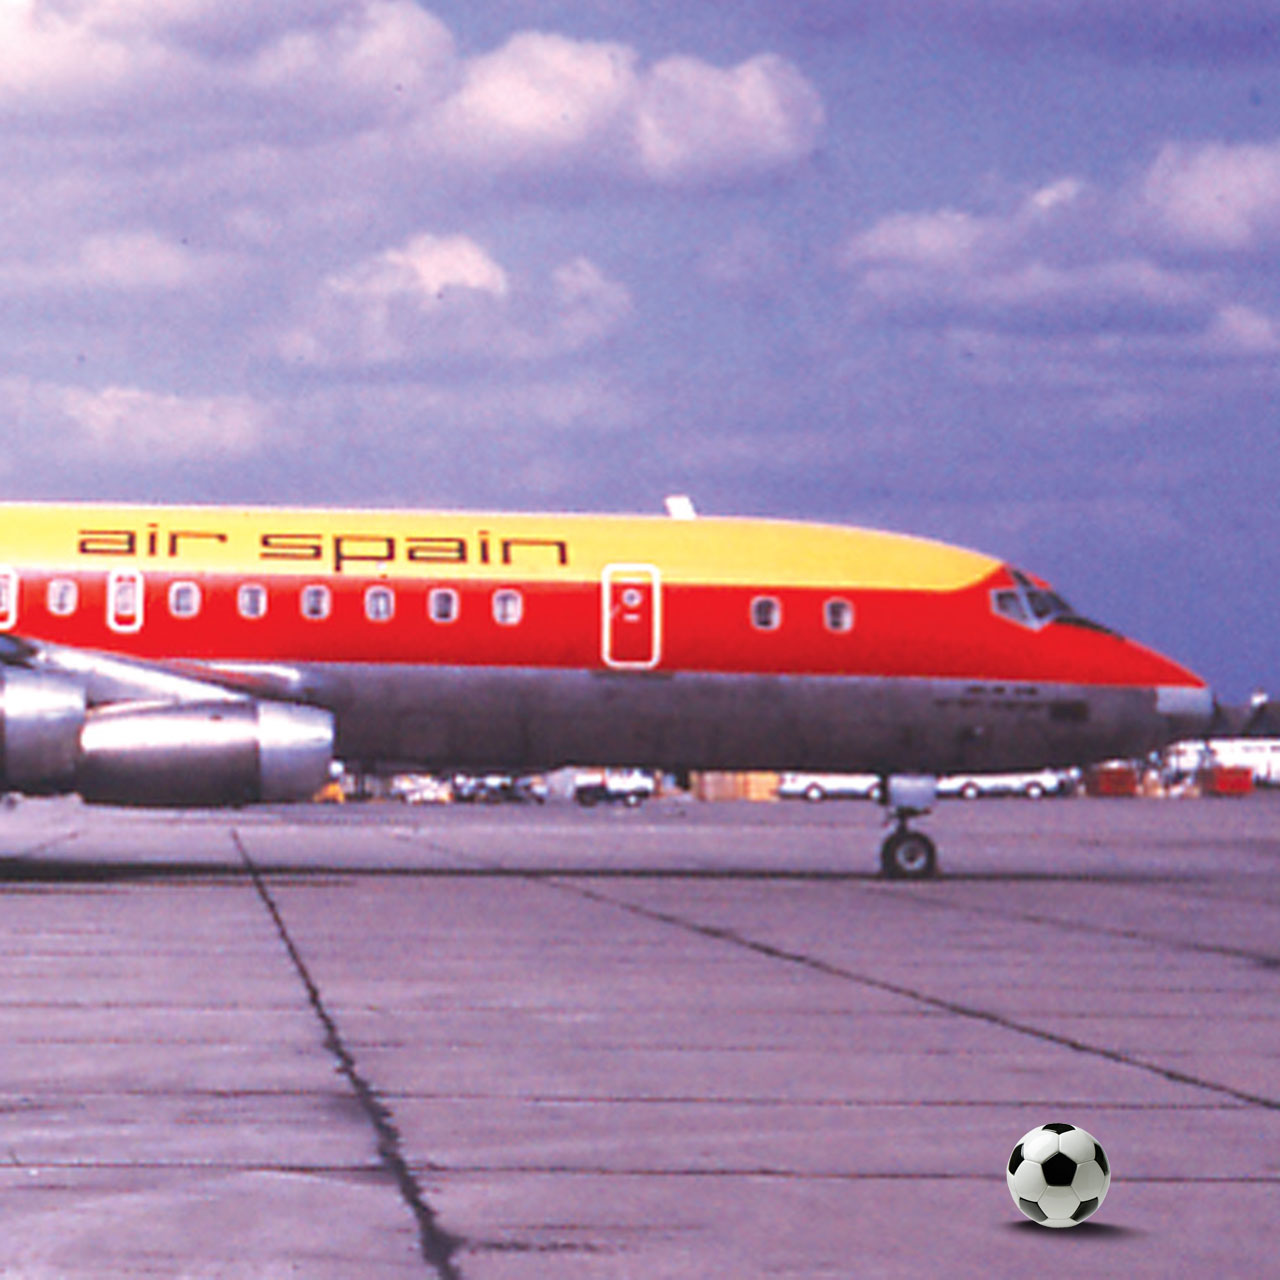 Air Spain plane ready to take Spain's football team home after 2014 World Cup group stage.